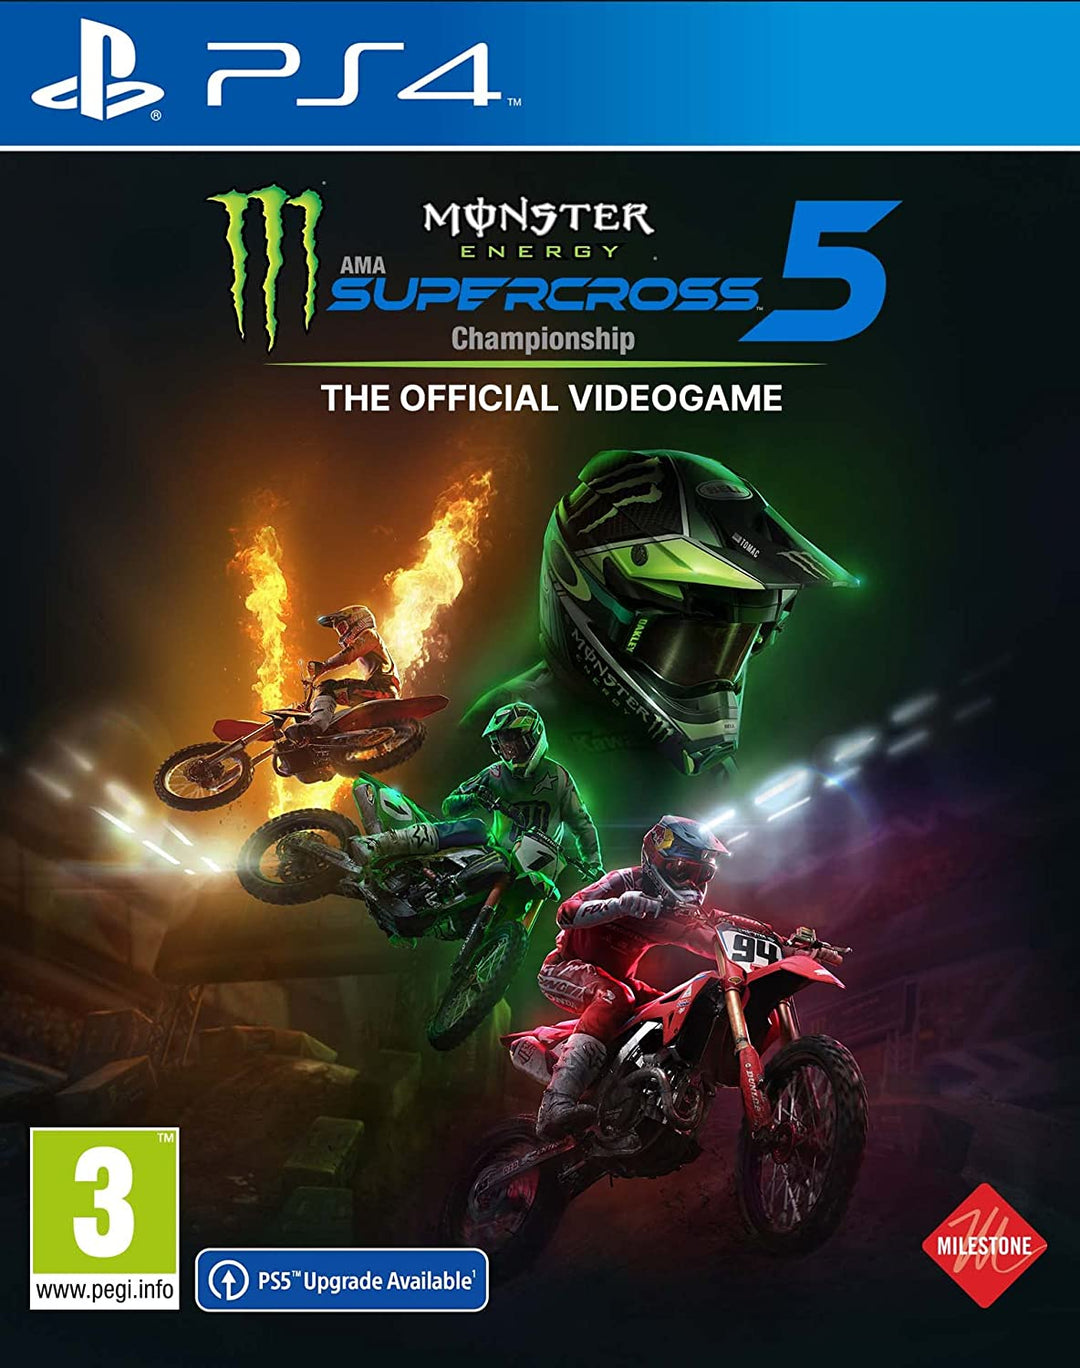 Monster Energy Supercross - The Official Videogame 5 (PS4) Includes Ice Blizzard